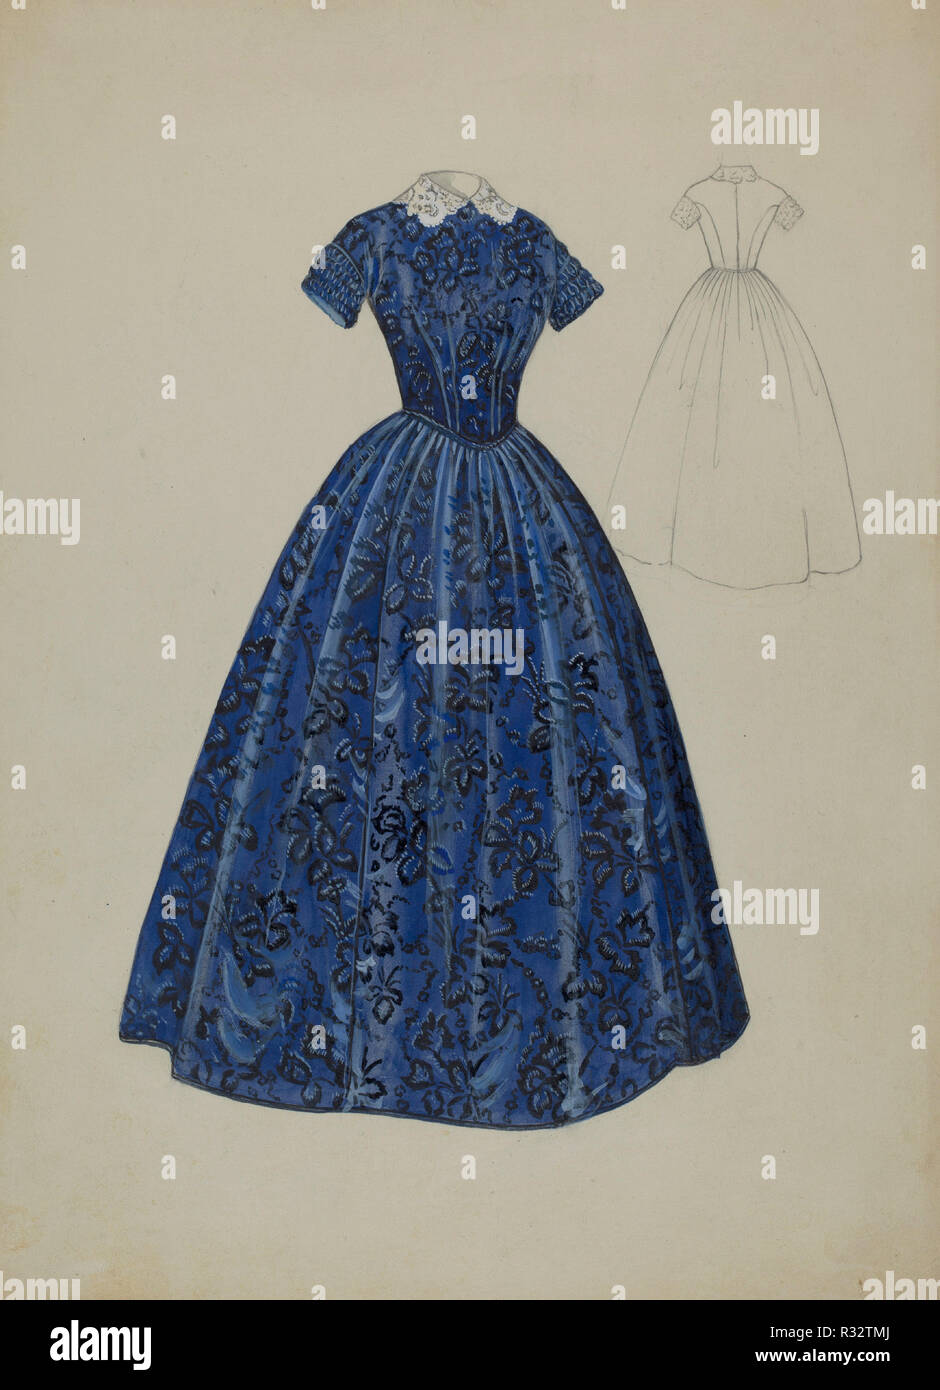 Dress. Dated: c. 1936. Dimensions: overall: 30.7 x 22.8 cm (12 1/16 x 9 in.). Medium: watercolor, graphite, and gouache on paperboard. Museum: National Gallery of Art, Washington DC. Author: Jessie M. Benge. Stock Photo